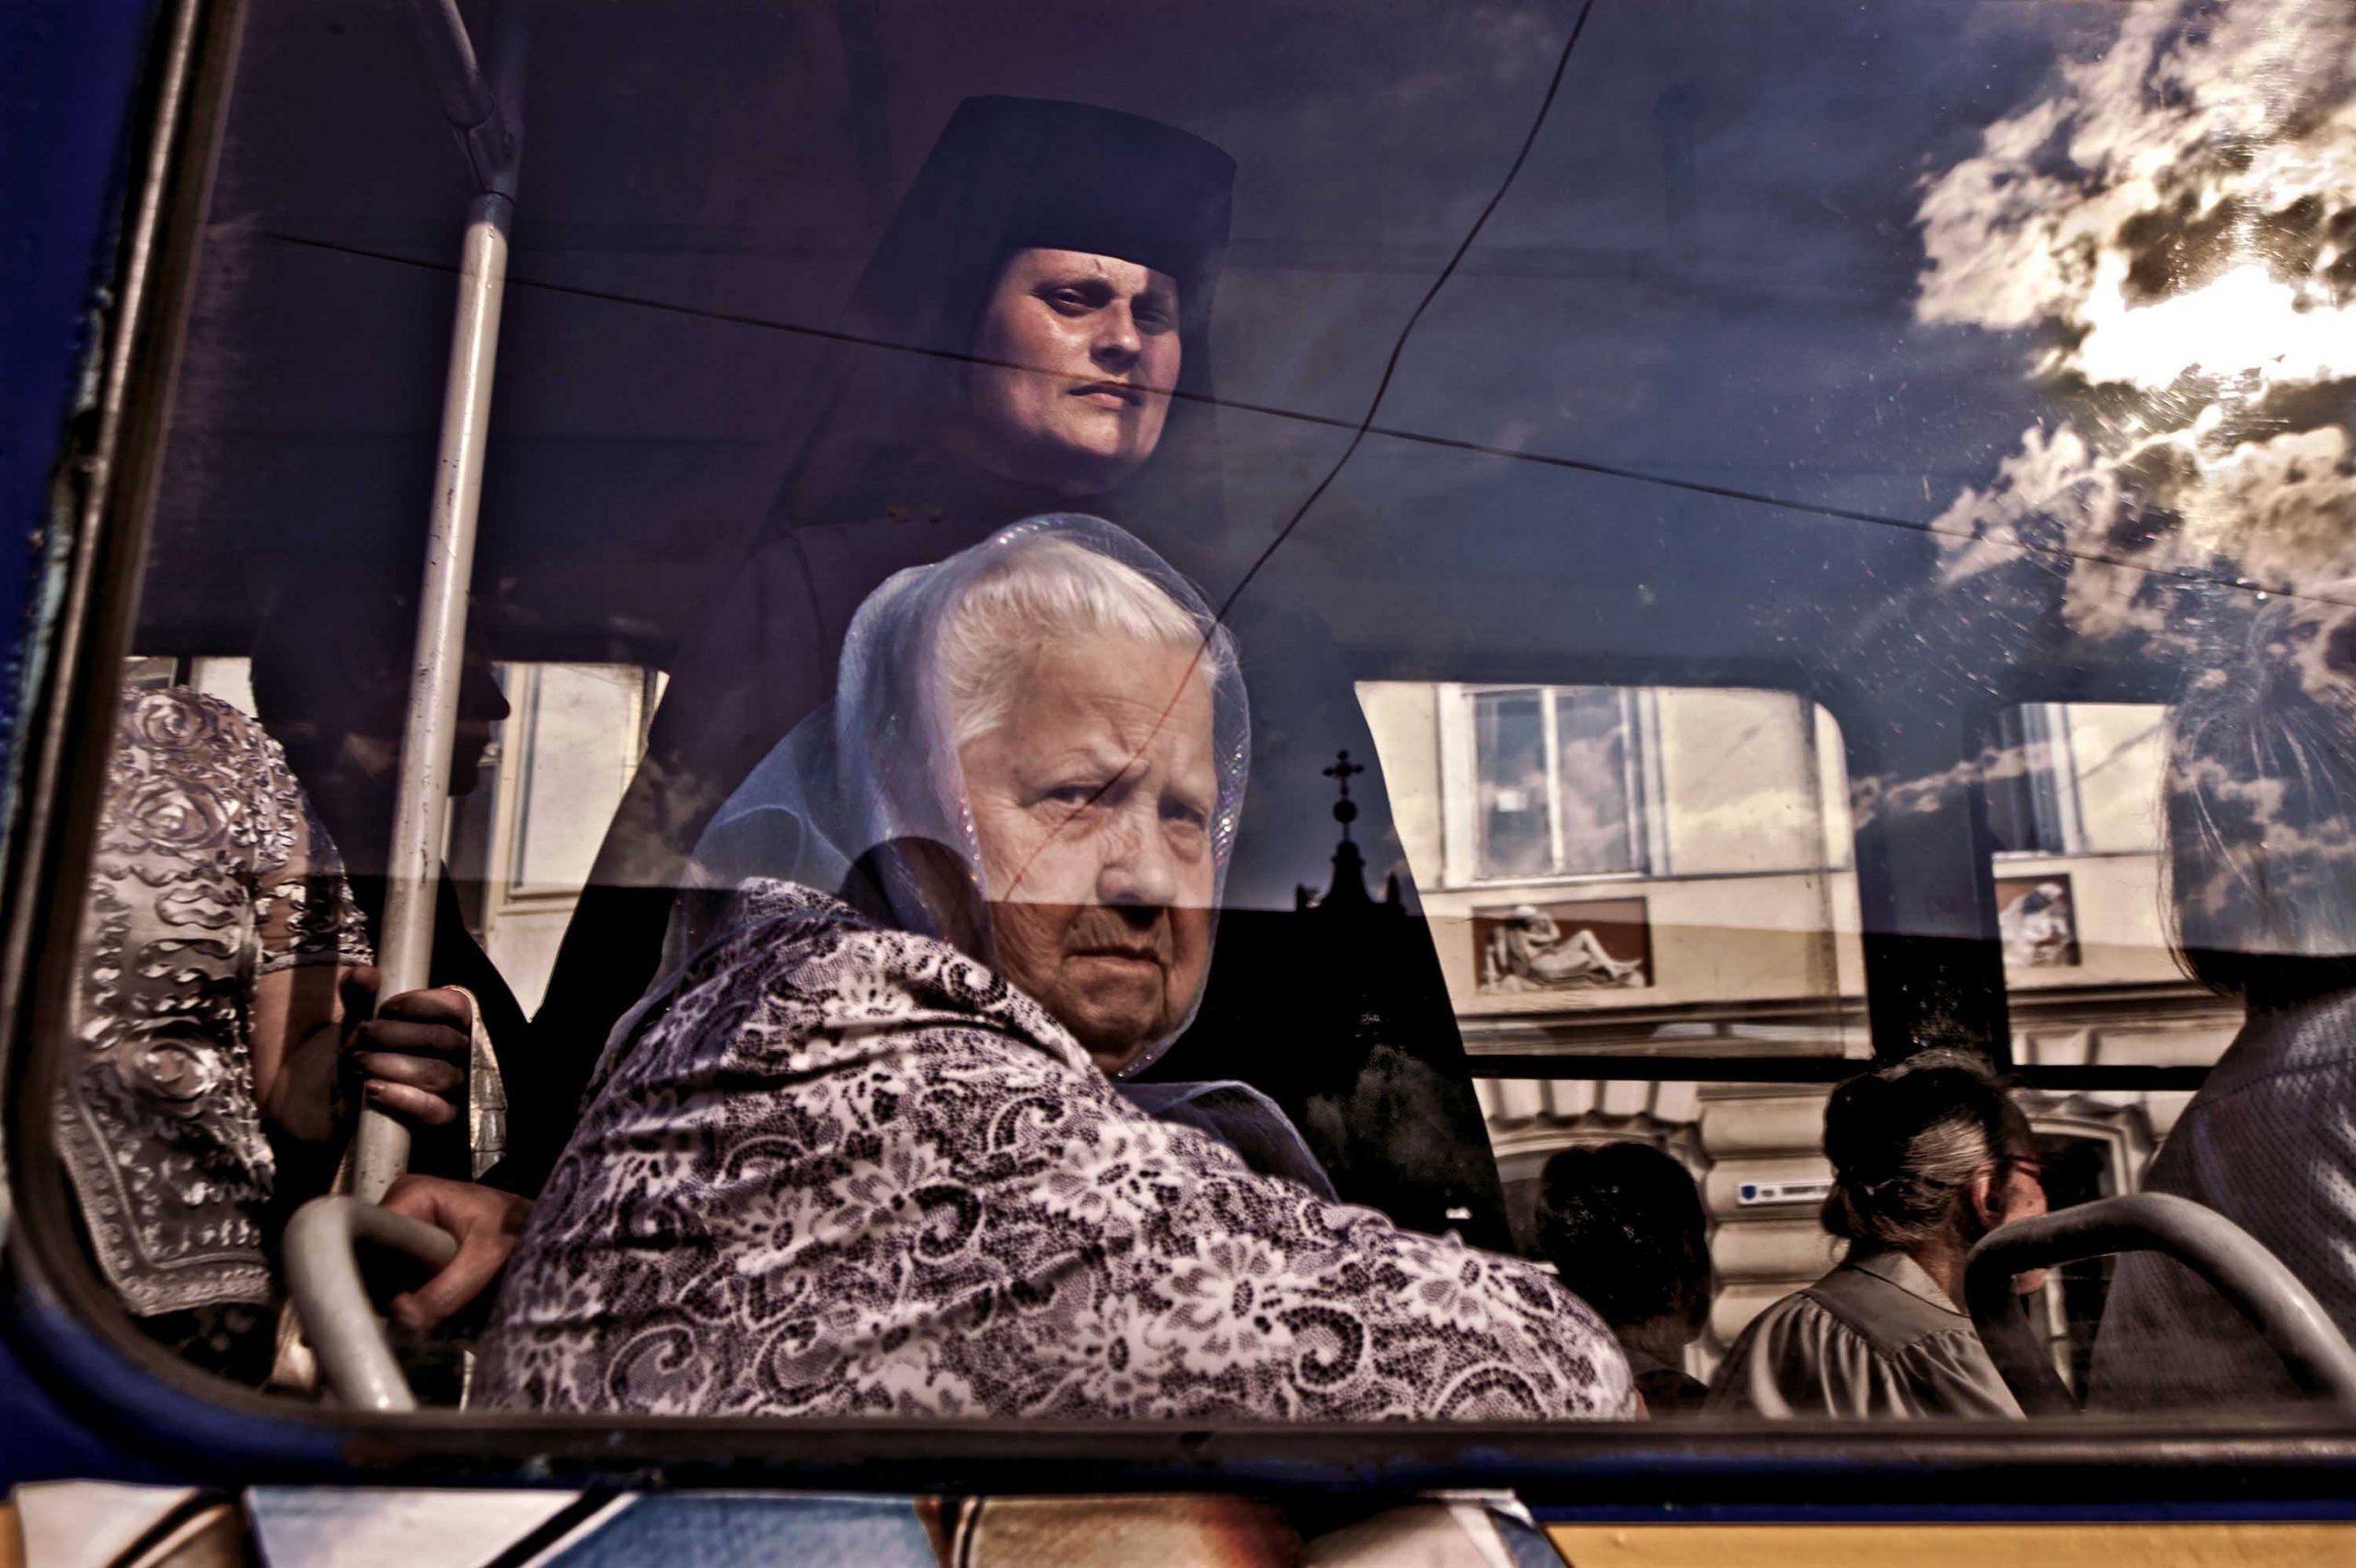 DOUGIE WALLACE LVIV REFLECTIONS ON LIFE 2 copy